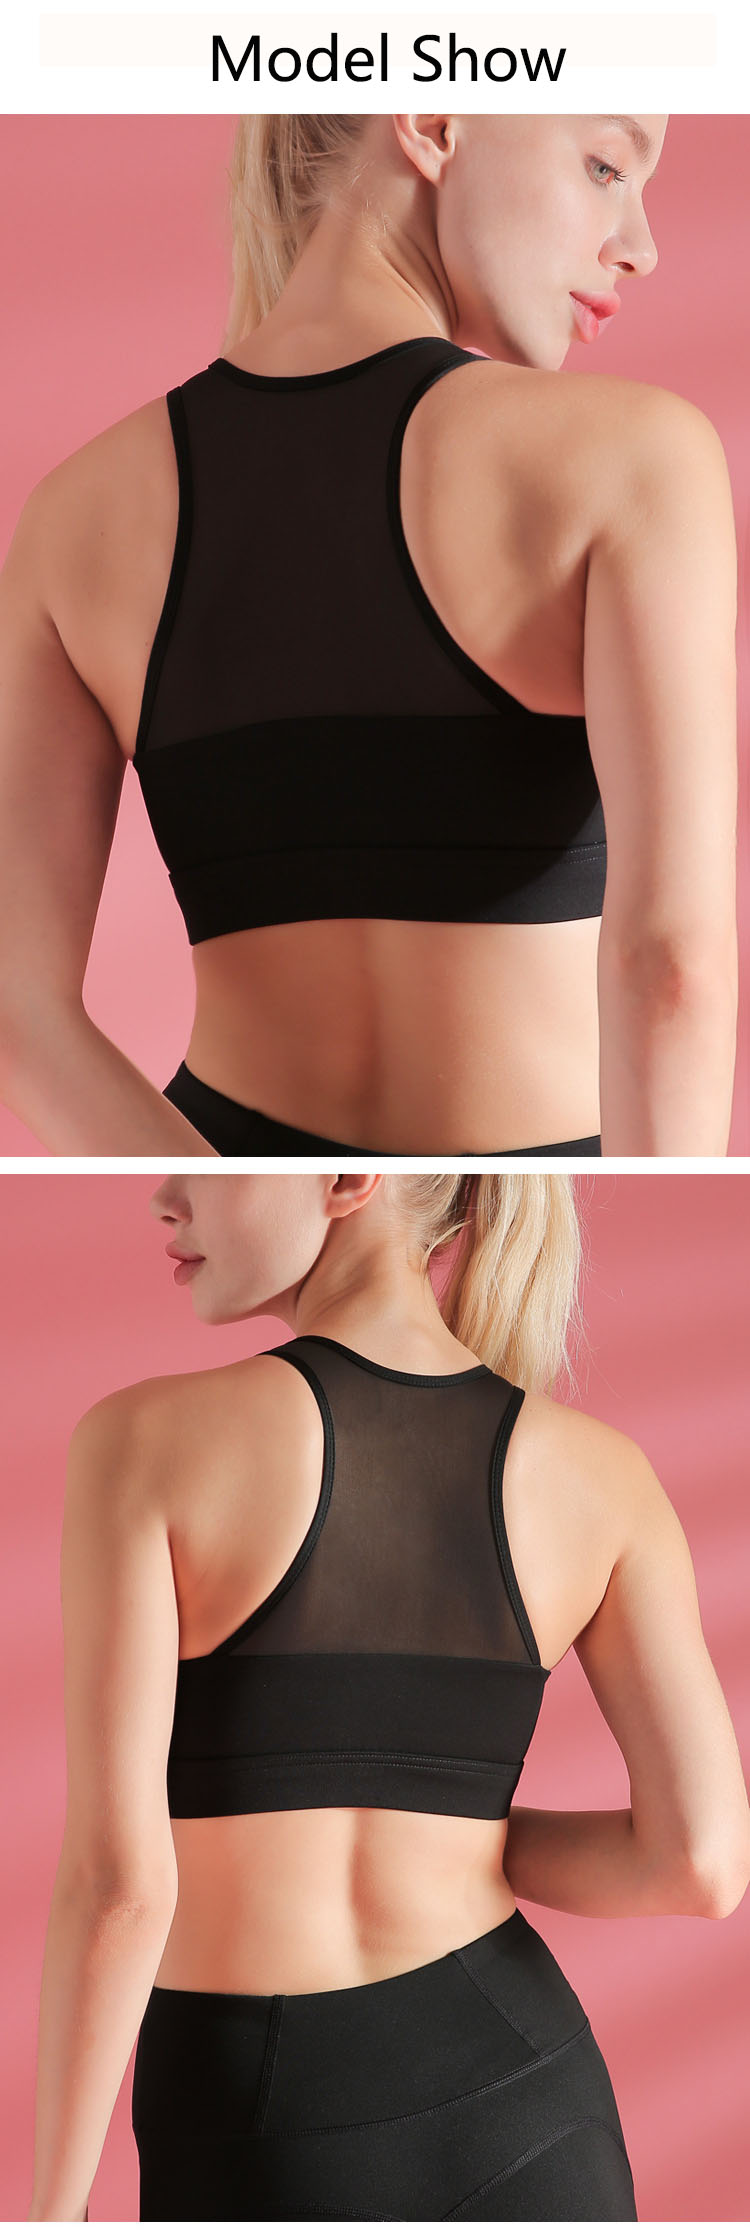 The design of the back and shoulder straps of the underwear is also being valued.